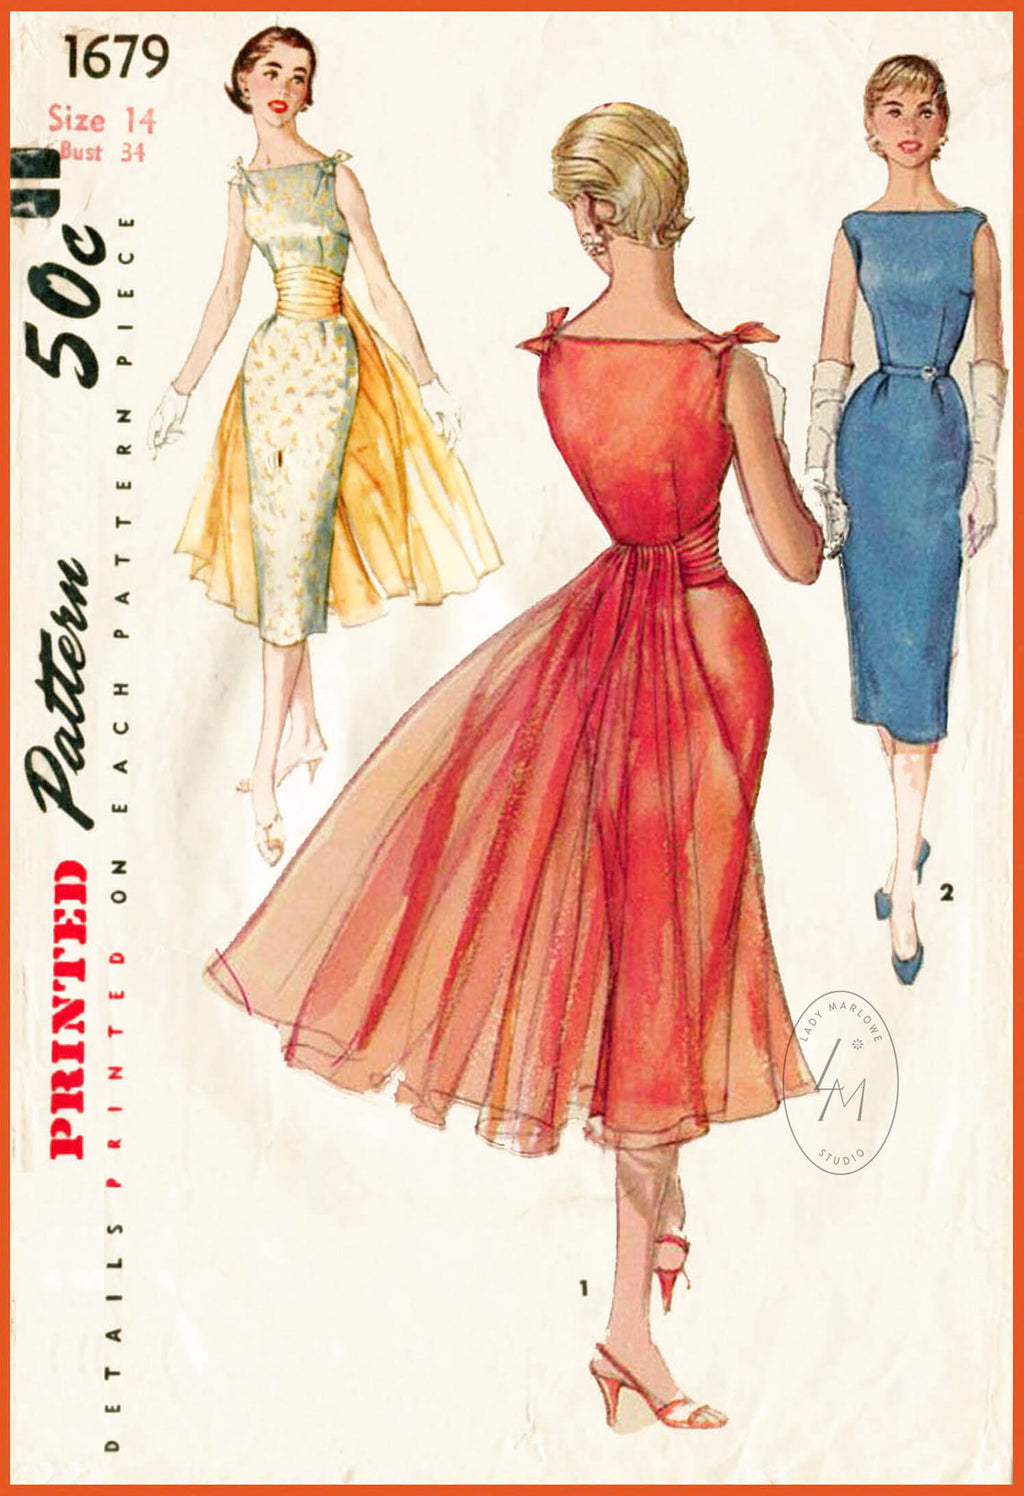 Simplicity 1679 1950s cocktail dress sewing pattern